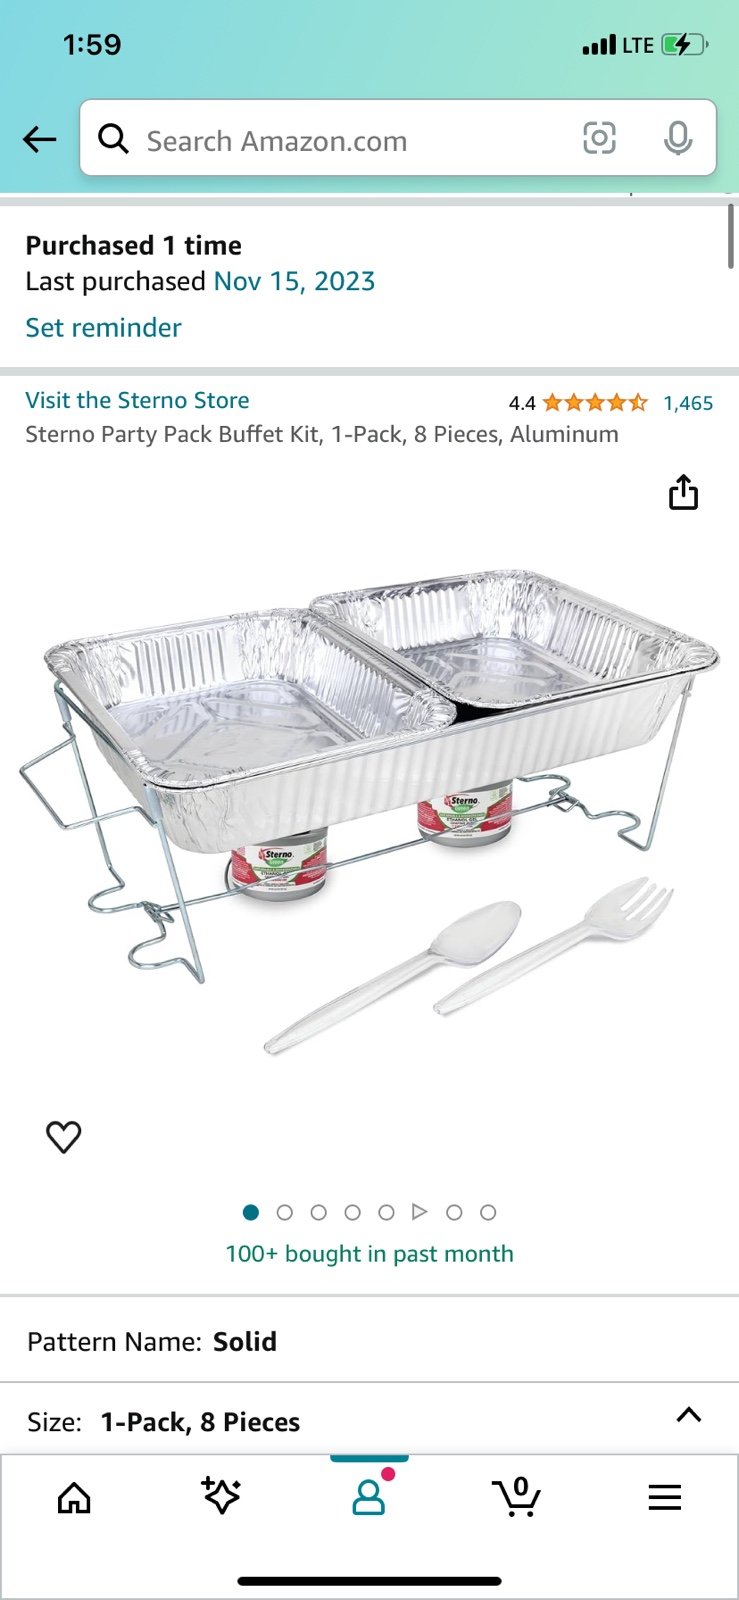 Sterno Party Pack Buffet Kit, 1-Pack, 8 Pieces, Aluminum o5IT6vBJV